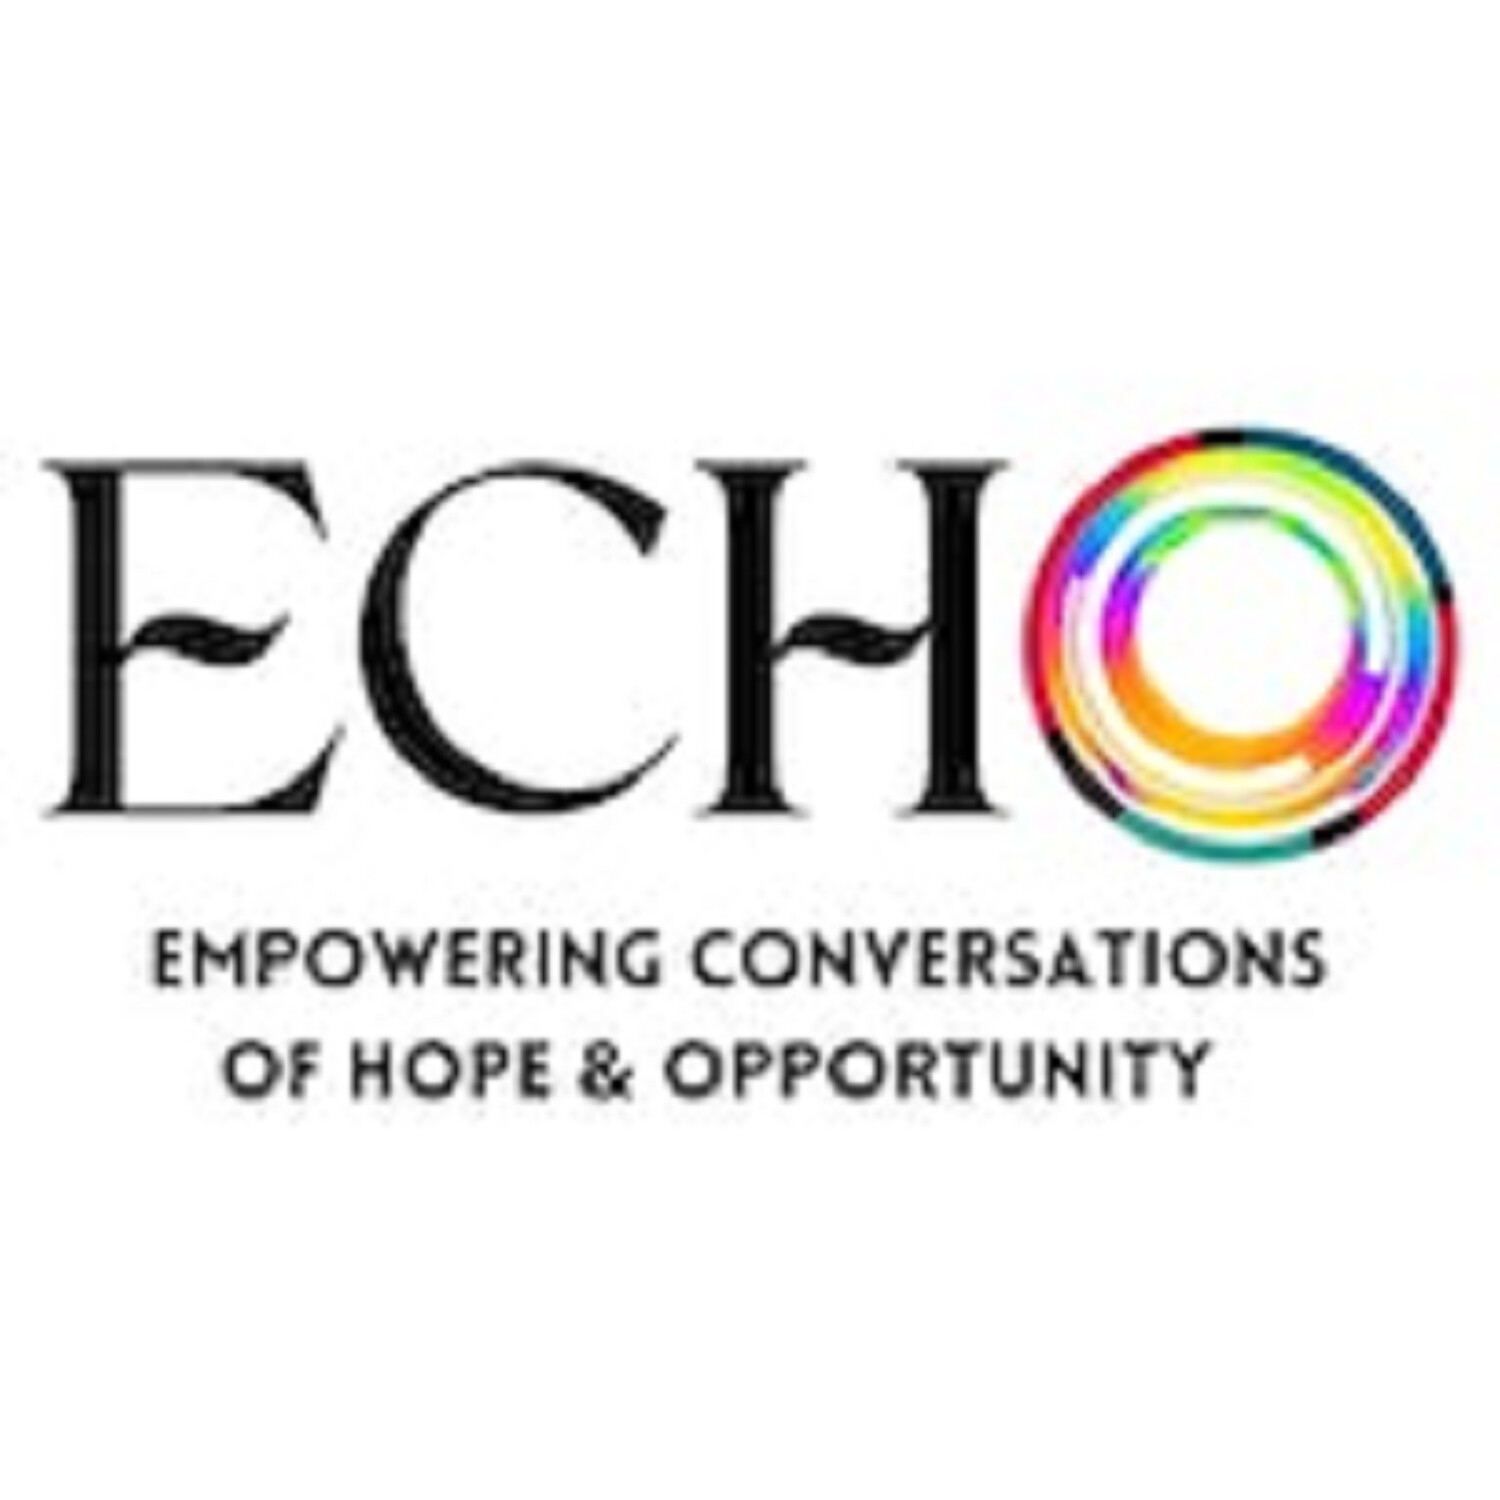 #4 ECHO This Hope In The Digital Age Navigate A Future With AI Optimism